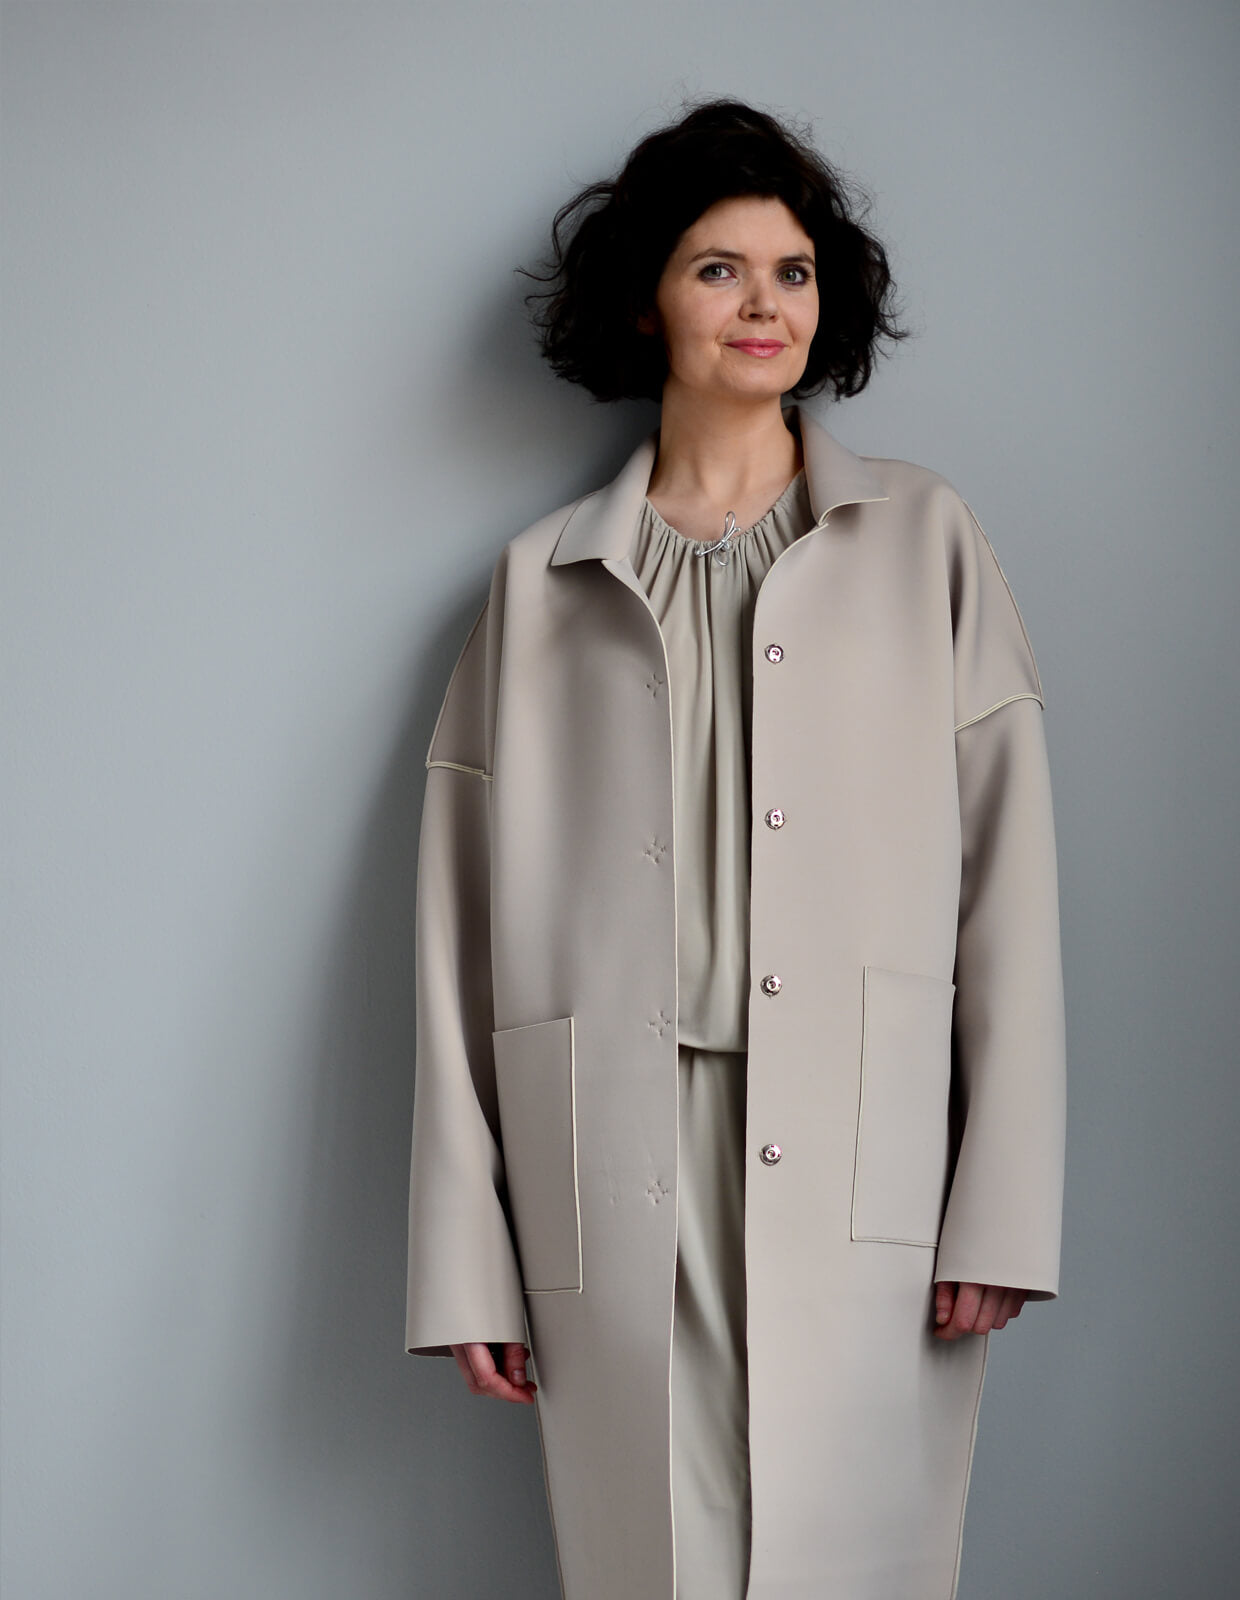 Woman wearing the Unlined Raw-edged Coat sewing pattern from The Maker's Atelier on The Fold Line. A coat pattern made in felted and boiled wools, hi-tech synthetics, neoprene and bonded fabrics, featuring dropped shoulders, patch pockets, over long sleev